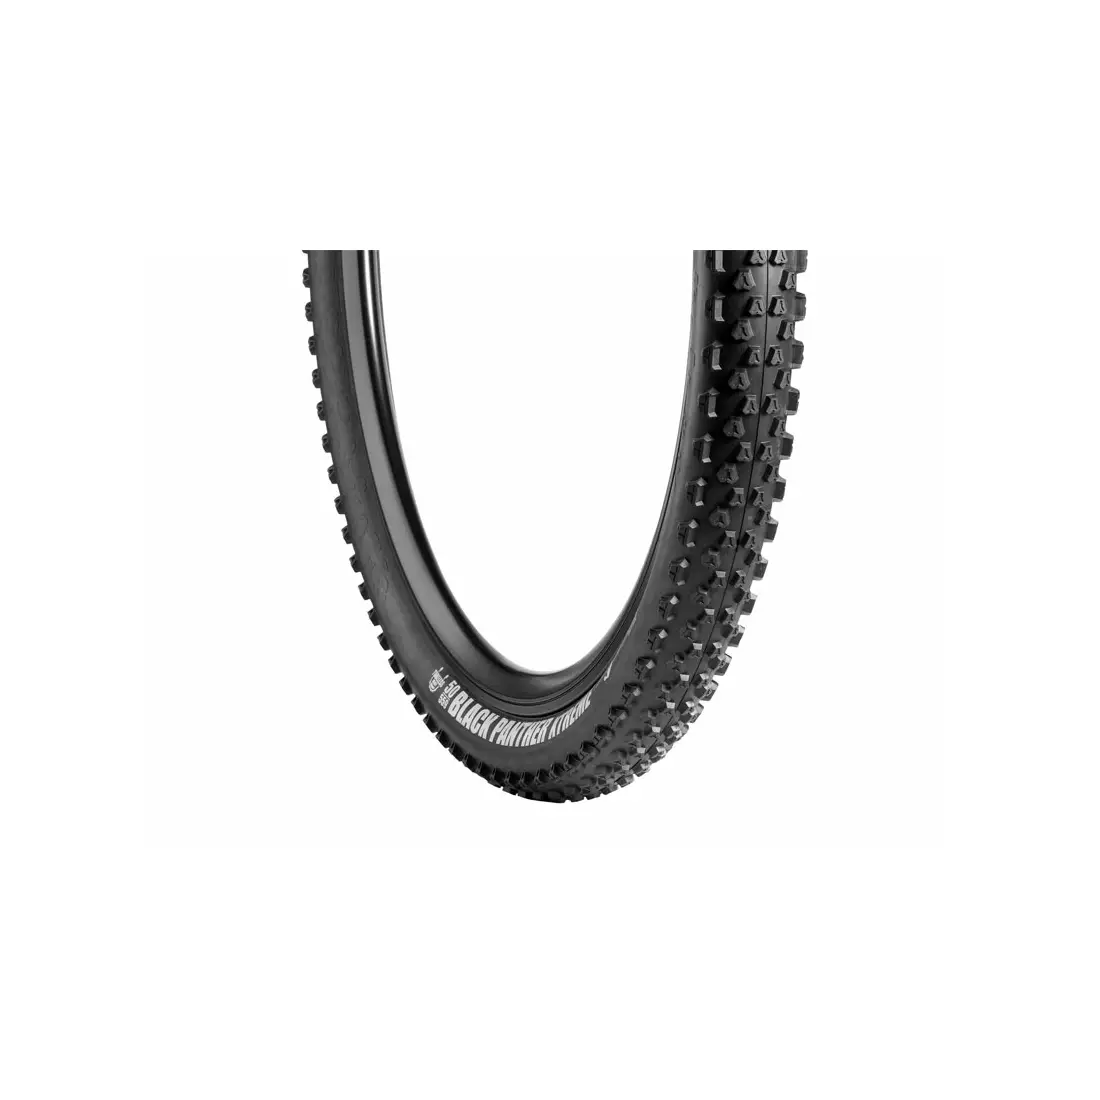 VREDESTEIN BLACK PANTHER XTREME Mtb bicycle tyre 27,5x2.20 (55-584) TUBELESS READY TPI120 645g black VRD-27306